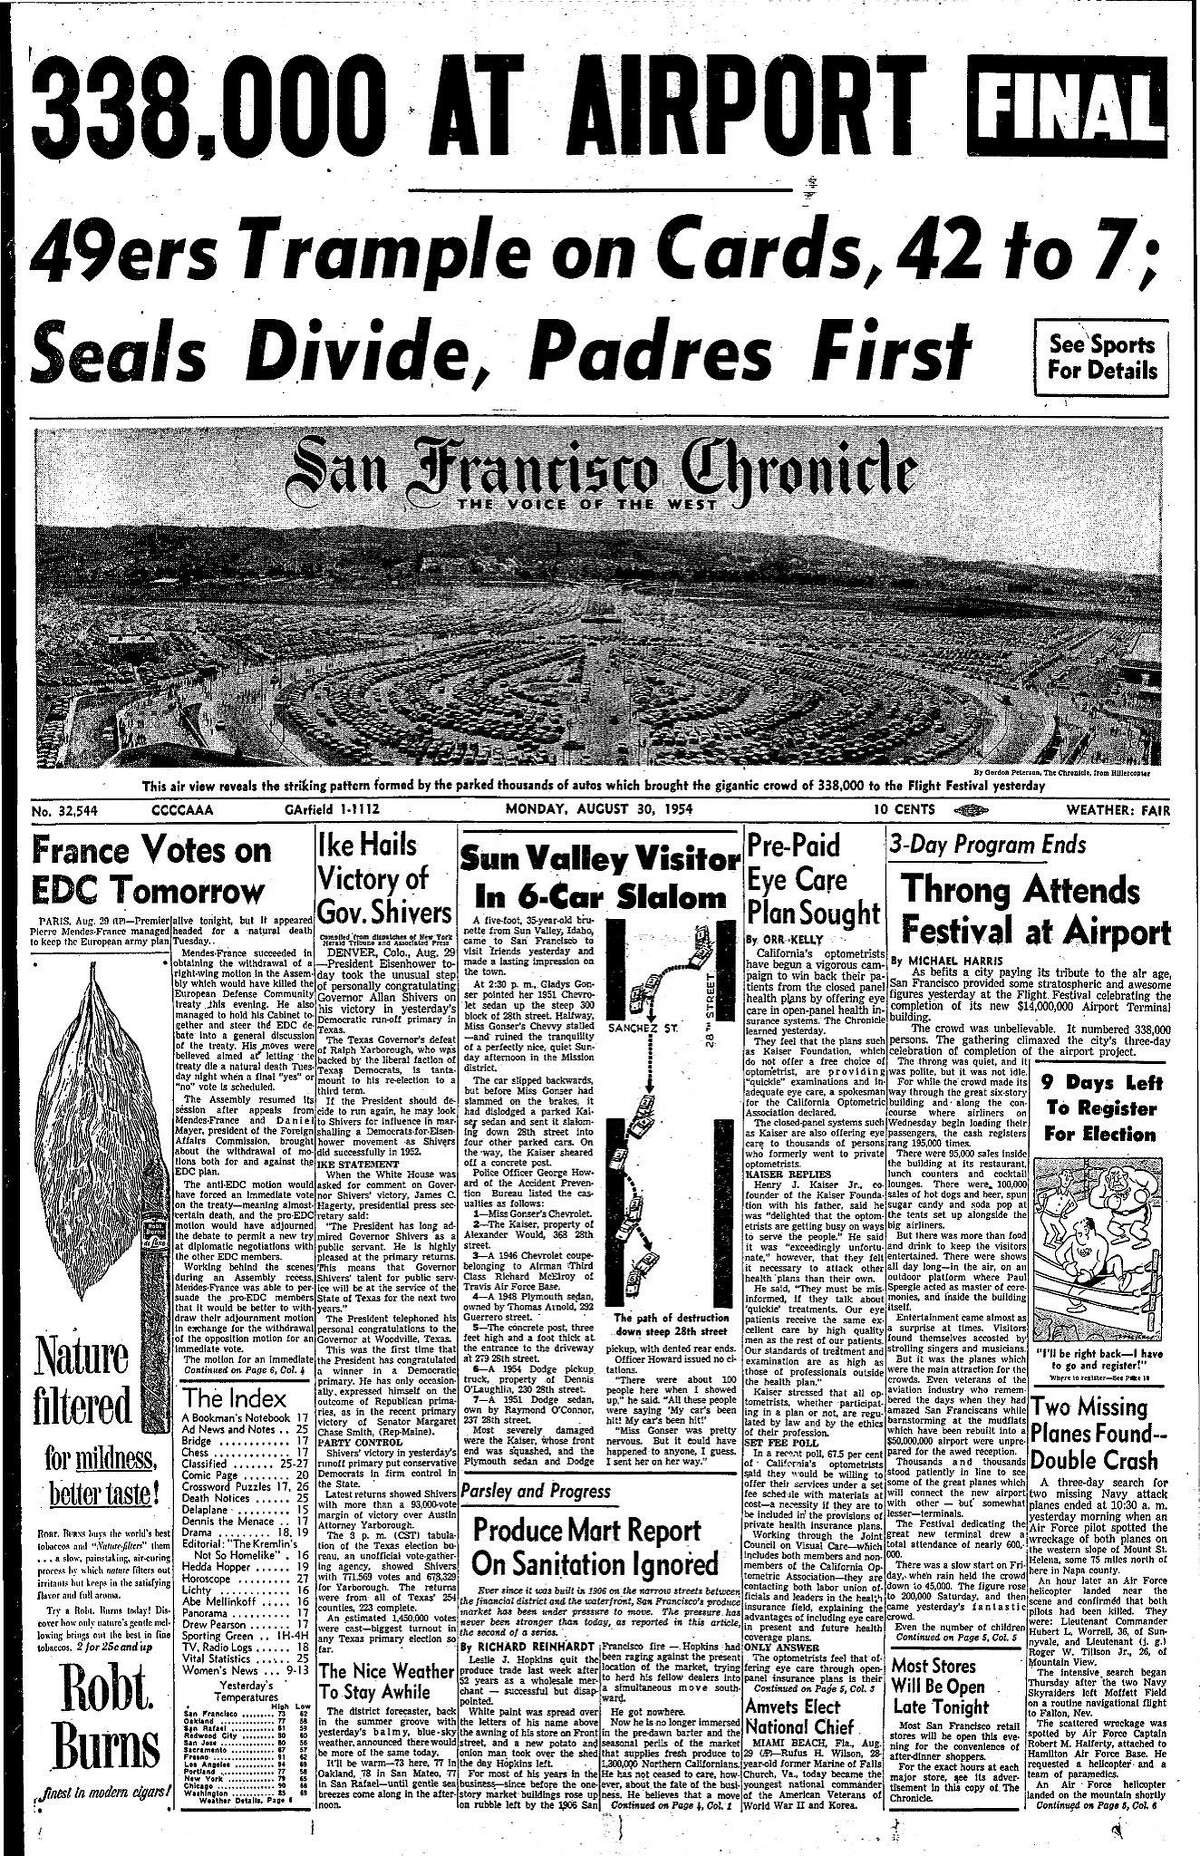 Historic Chronicle Front Page August 28, 1954 San Francisco dedicates new airport terminal Chron365, Chroncover